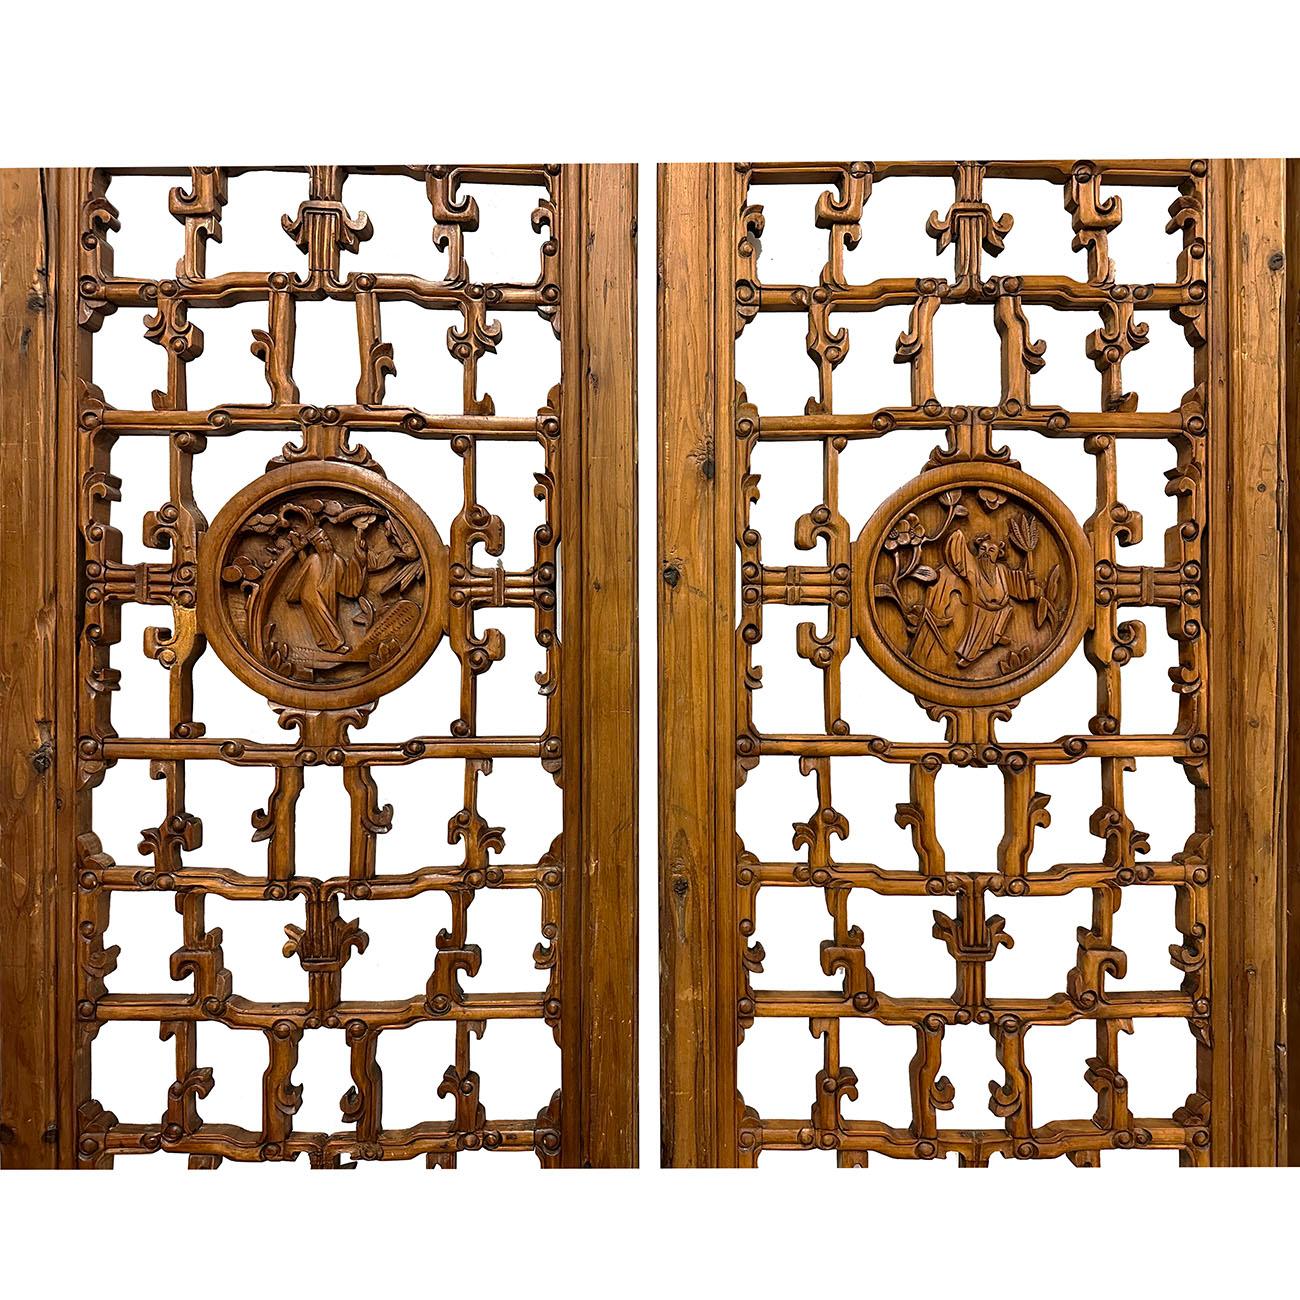 Chinese Export Late 19th Century Antique Chinese Hand Carved 6 Panels Wooden Screen/Room Divide For Sale